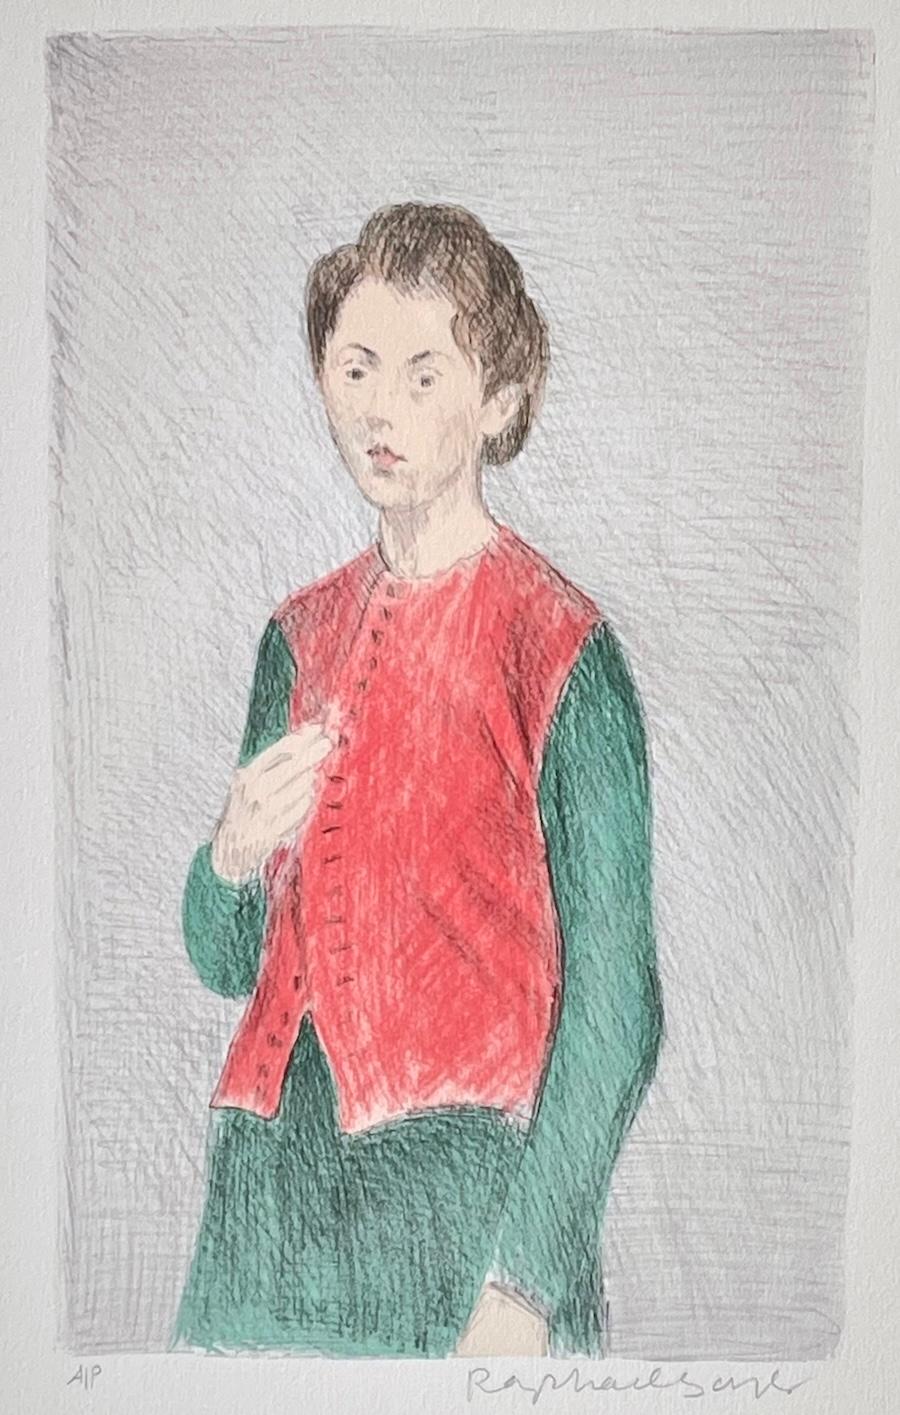 Raphael Soyer Portrait Print - YOUNG WOMAN RED VEST Signed Lithograph, Standing Woman Hair Up, Green Dress